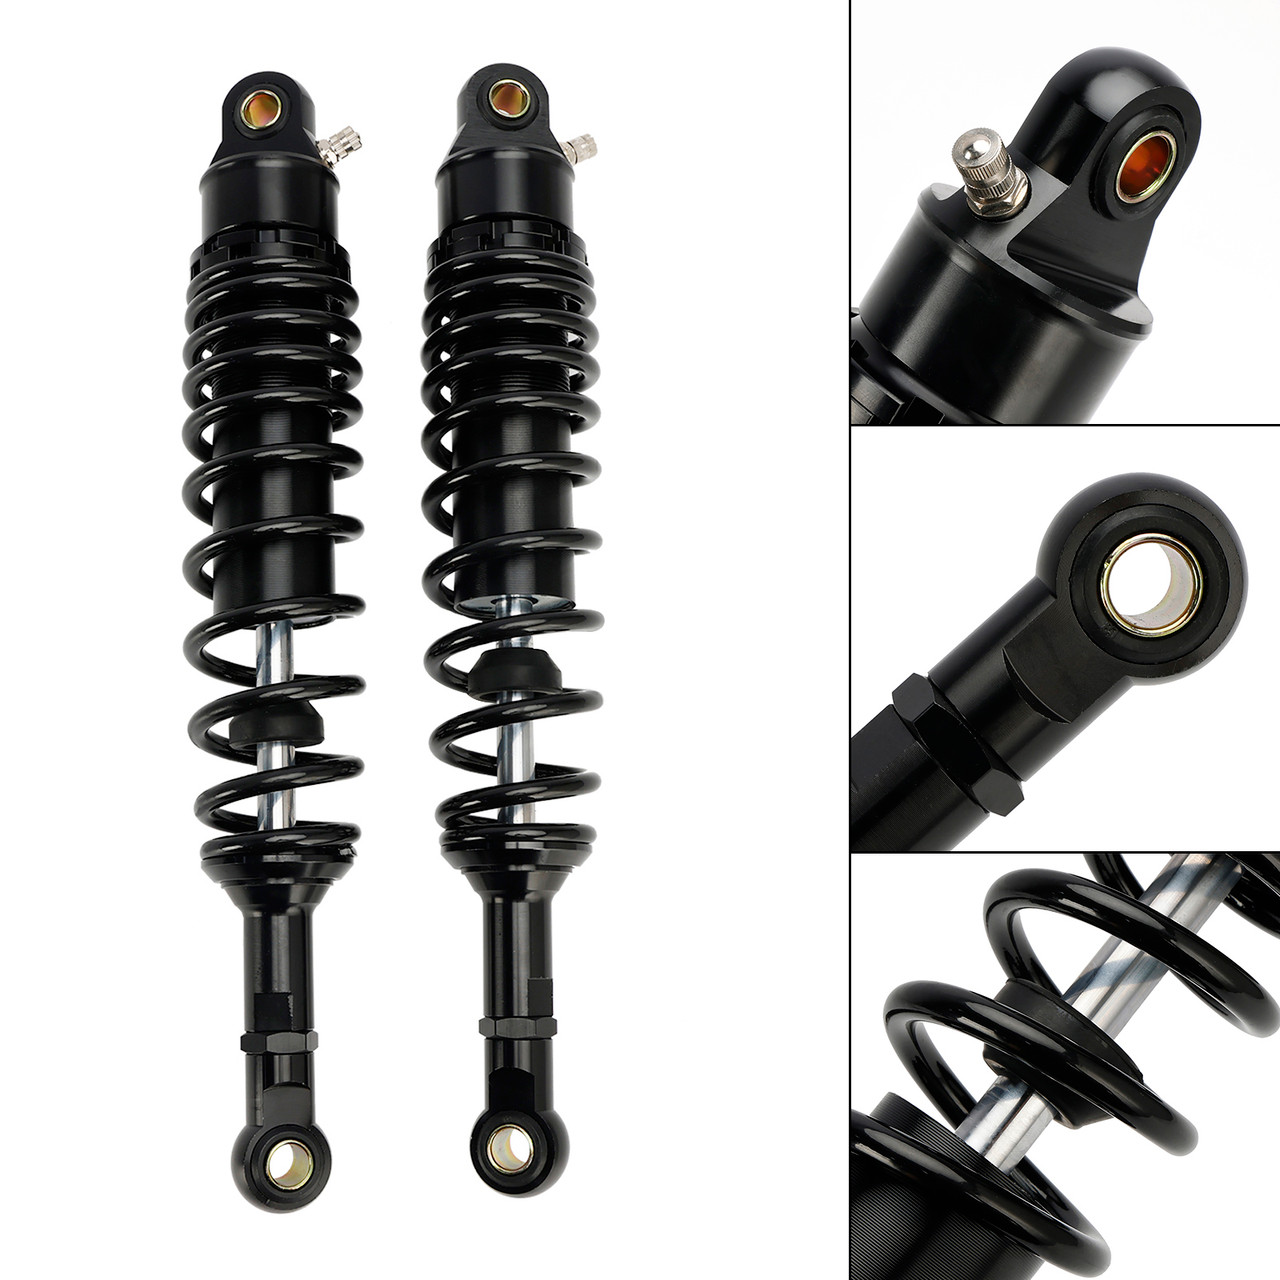 365mm Rear Suspension Air Shock Absorbers fit for Honda CT125 Cross Cub 110 50 A